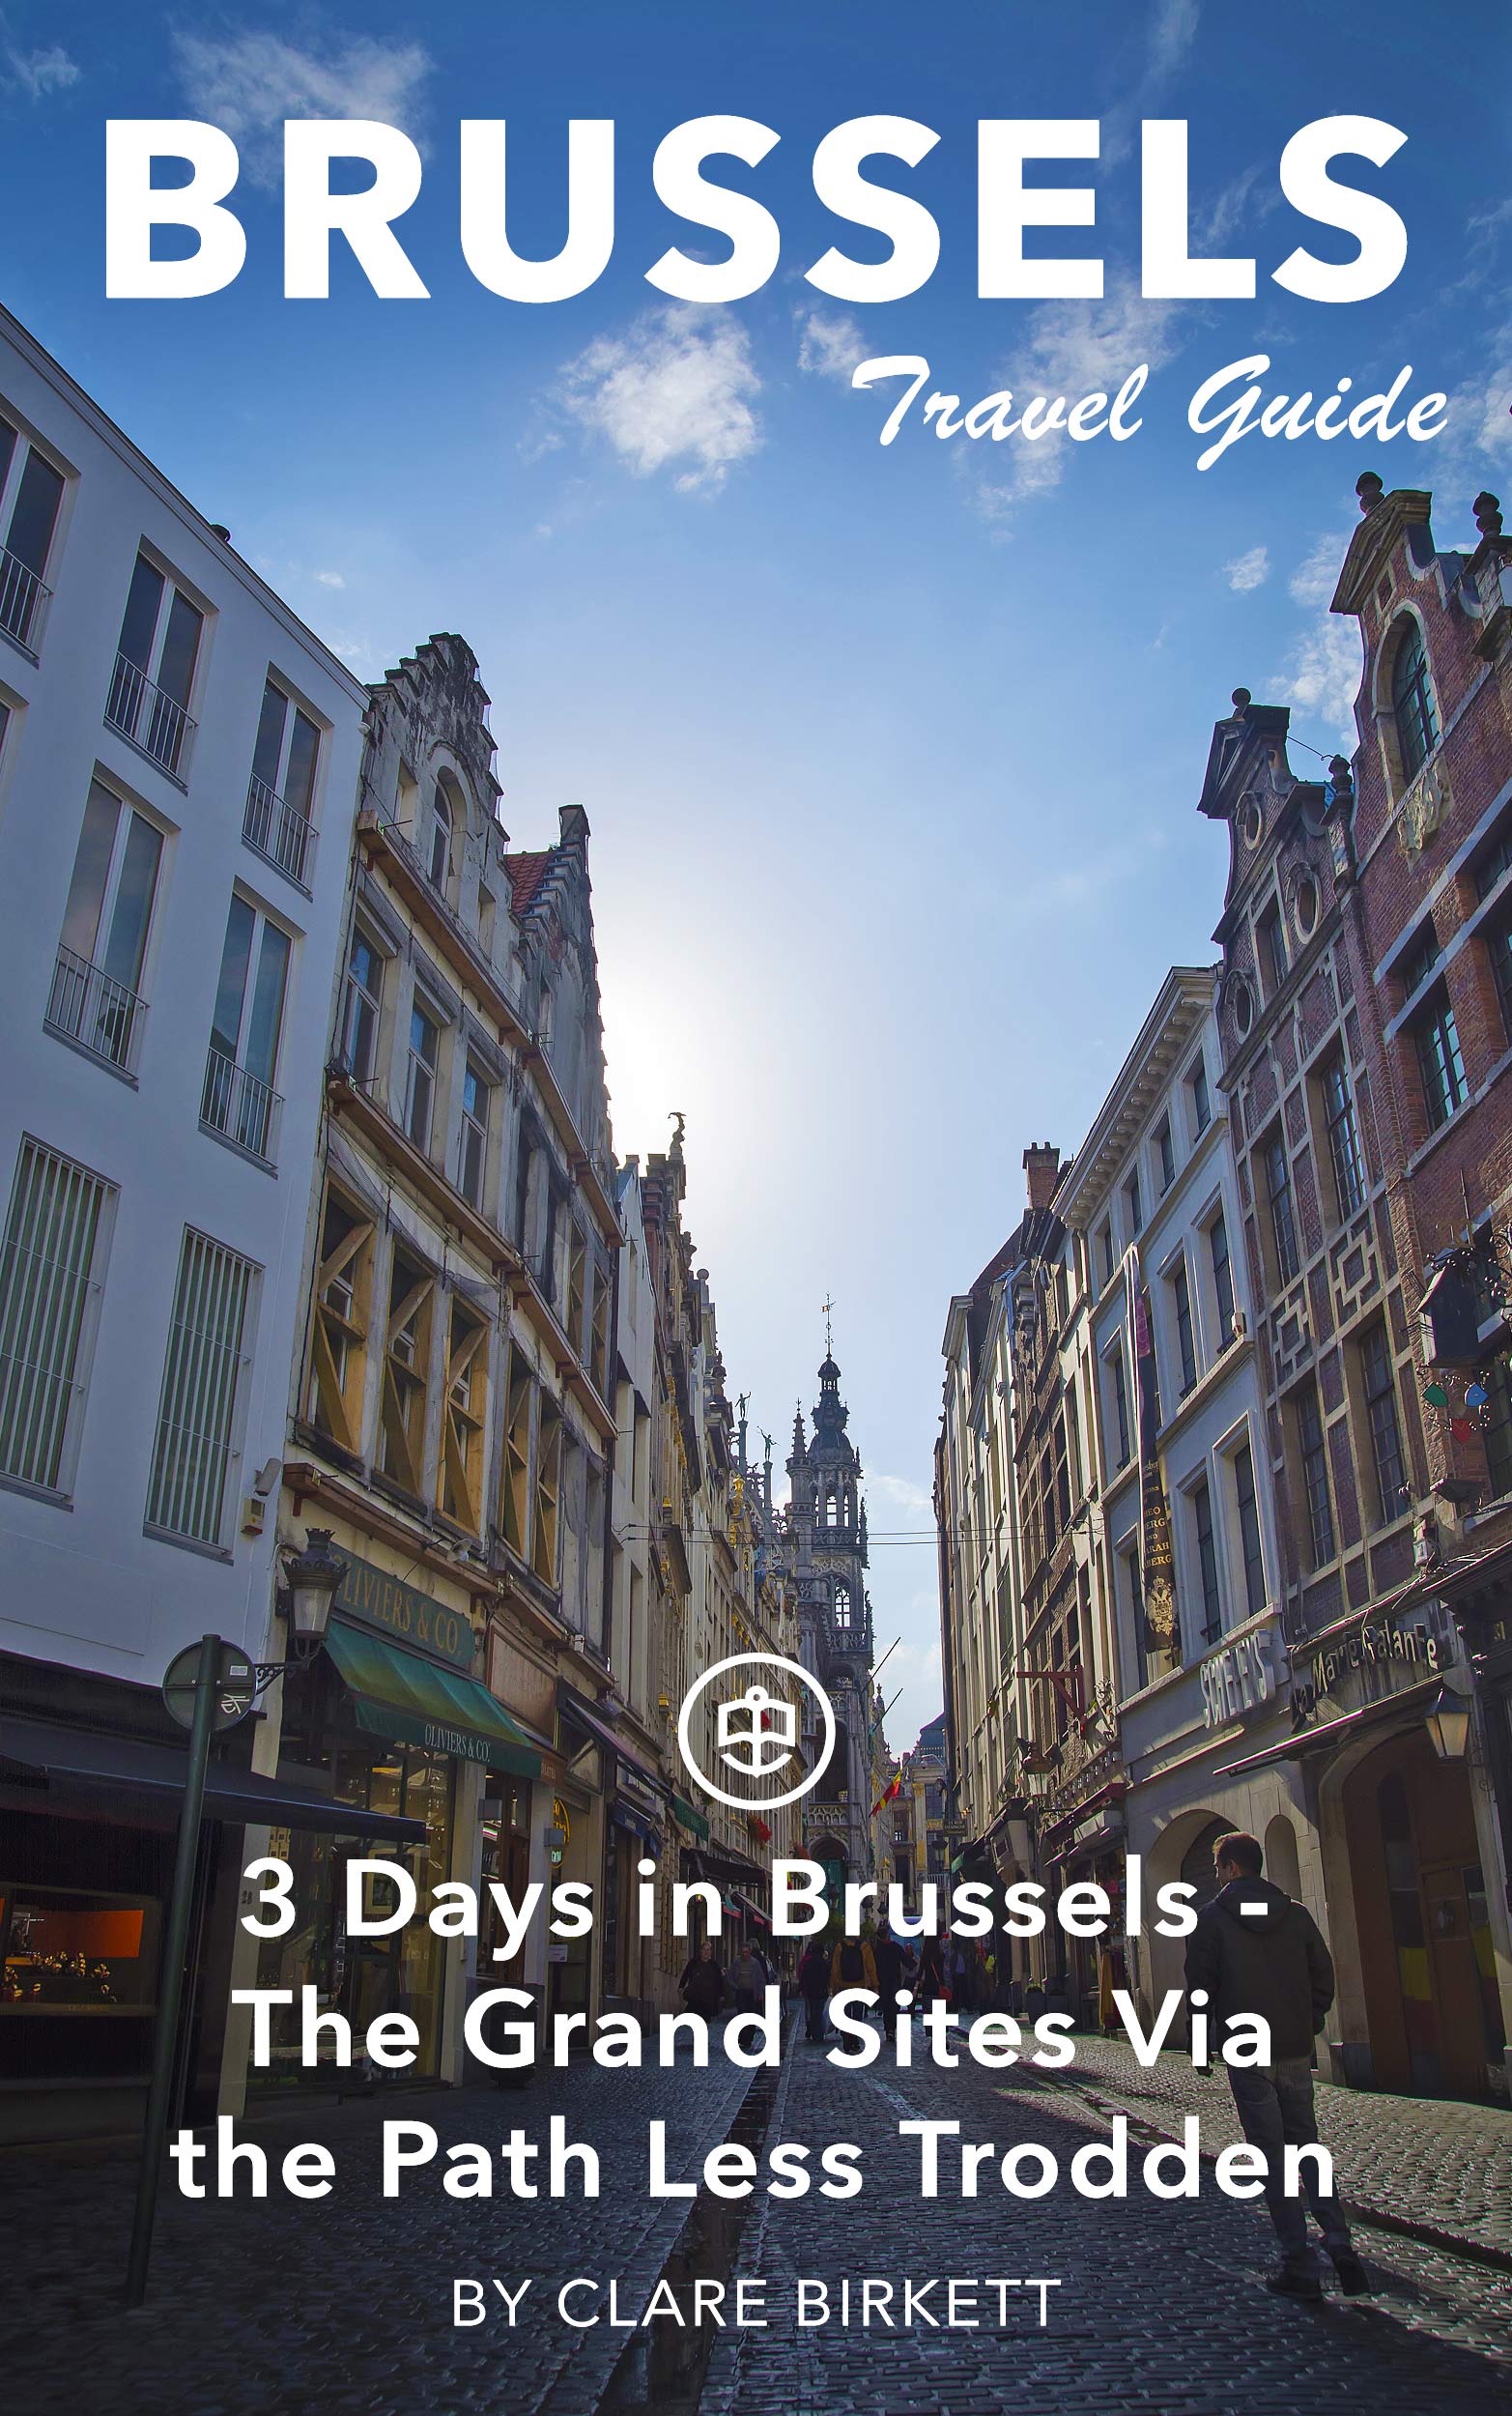 3 Days in Brussels - The grand sites via the path less trodden